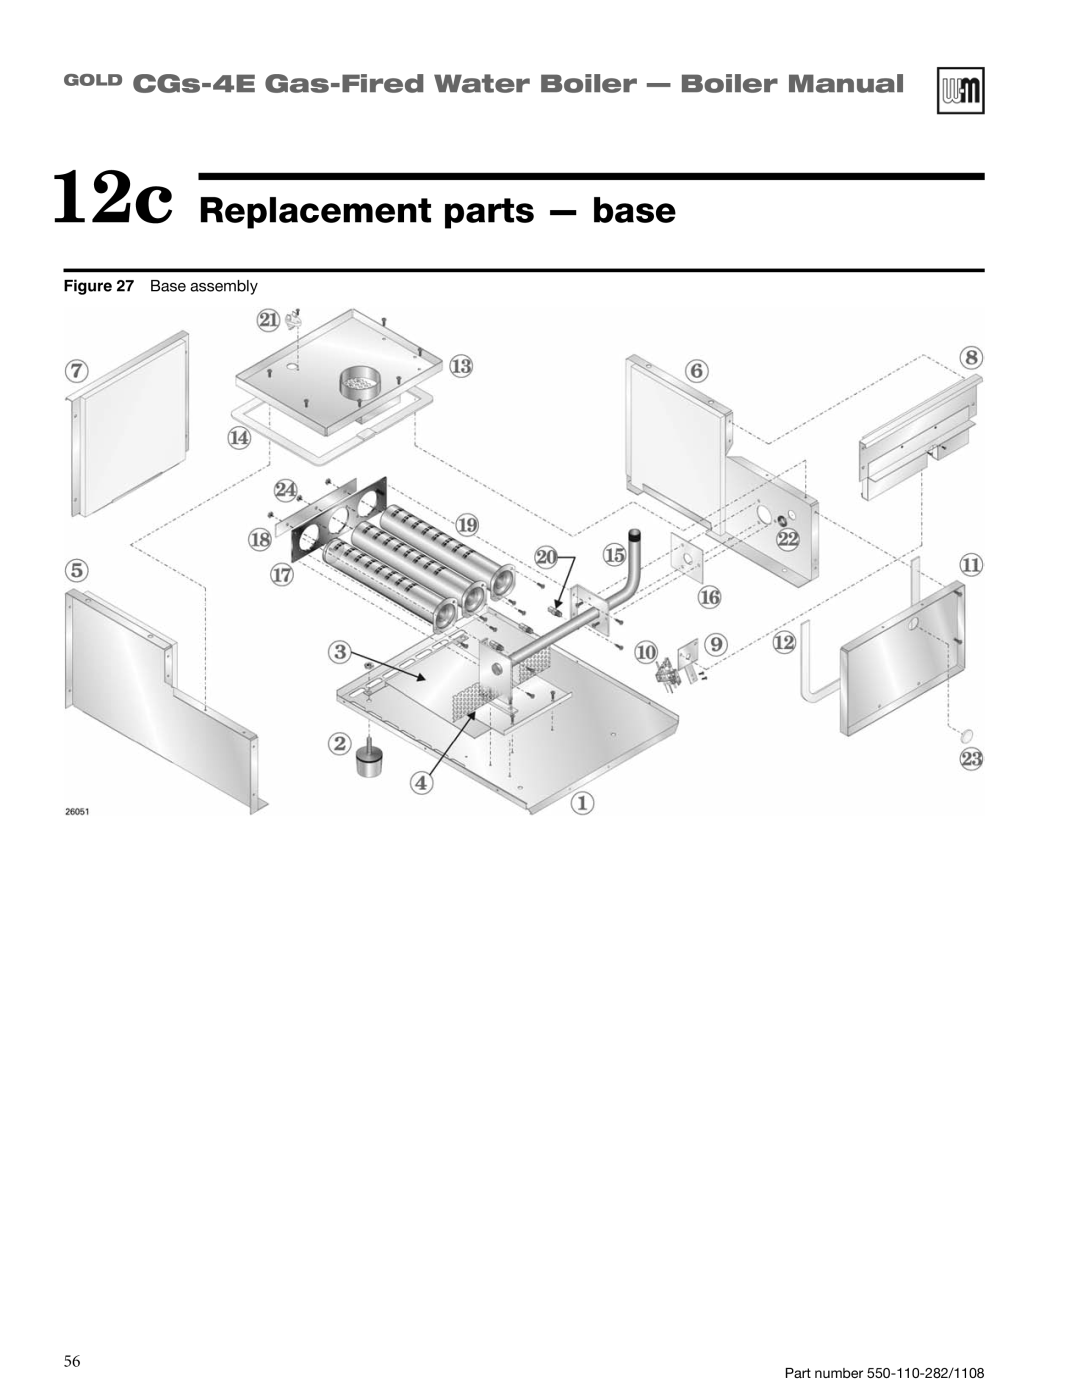 Weil-McLain CGS-4E manual 12c Replacement parts - base, GOLD CGs-4E Gas-FiredWater Boiler - Boiler Manual, Base assembly 